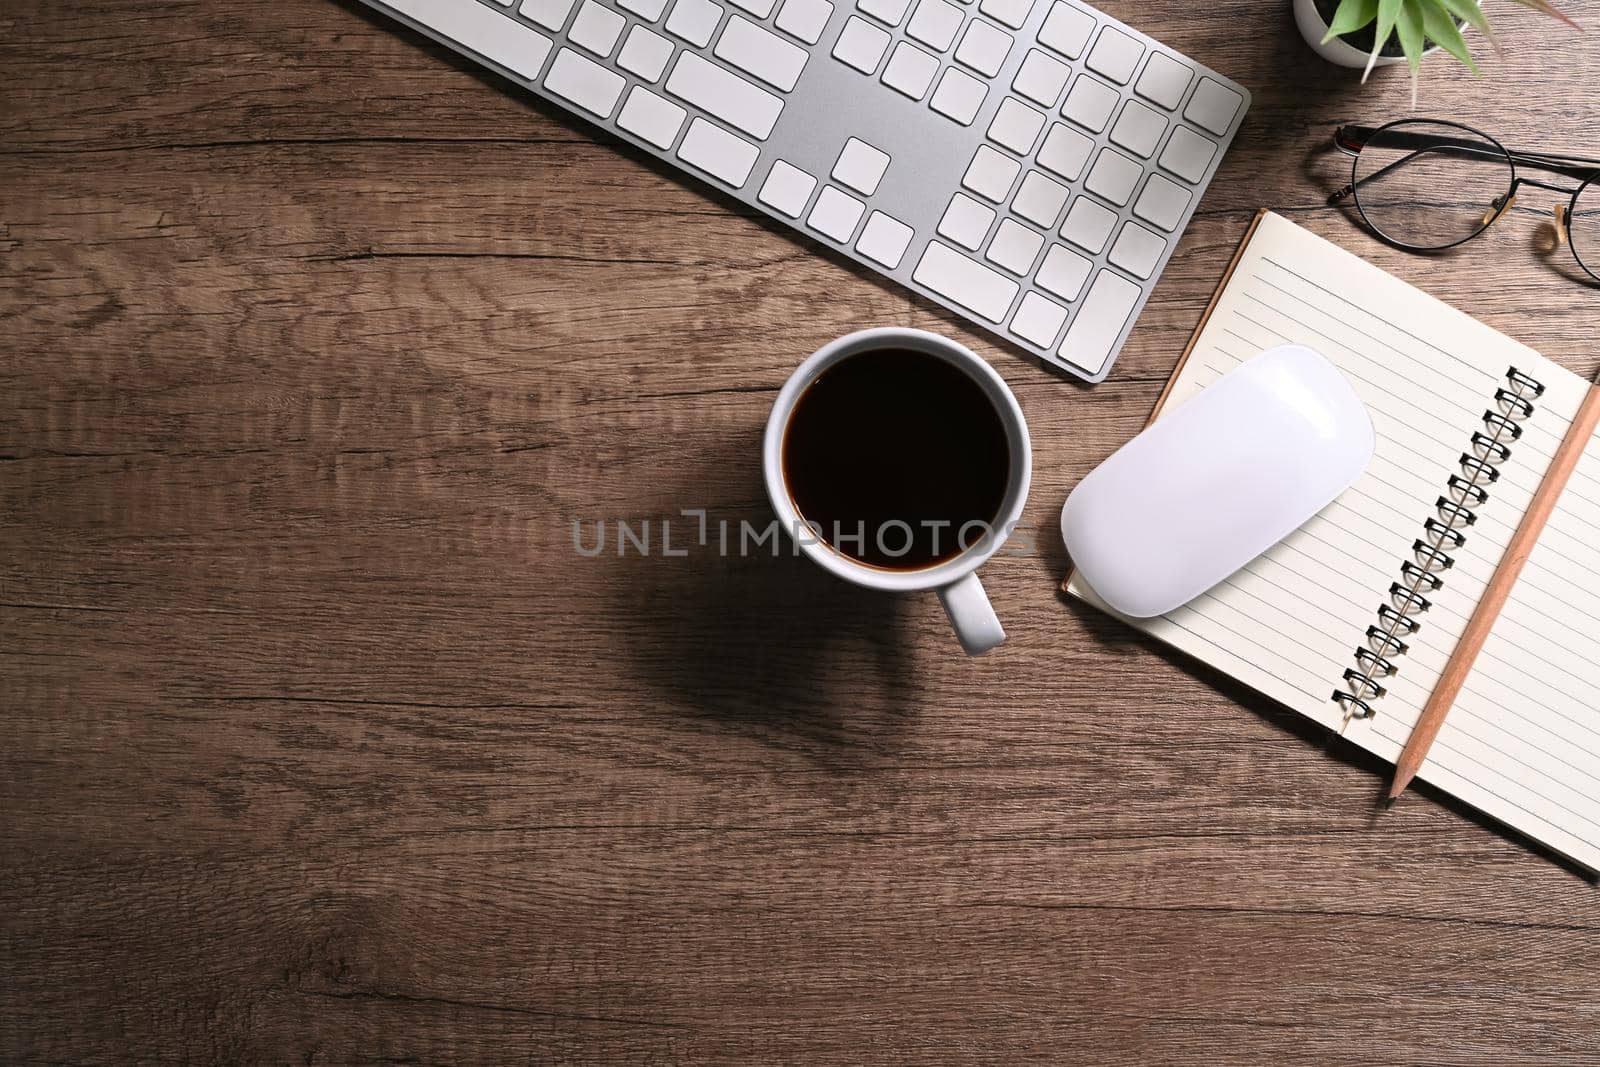 Top view wireless keyboard, cup of coffee and notebook on wooden background. Simple workplace.